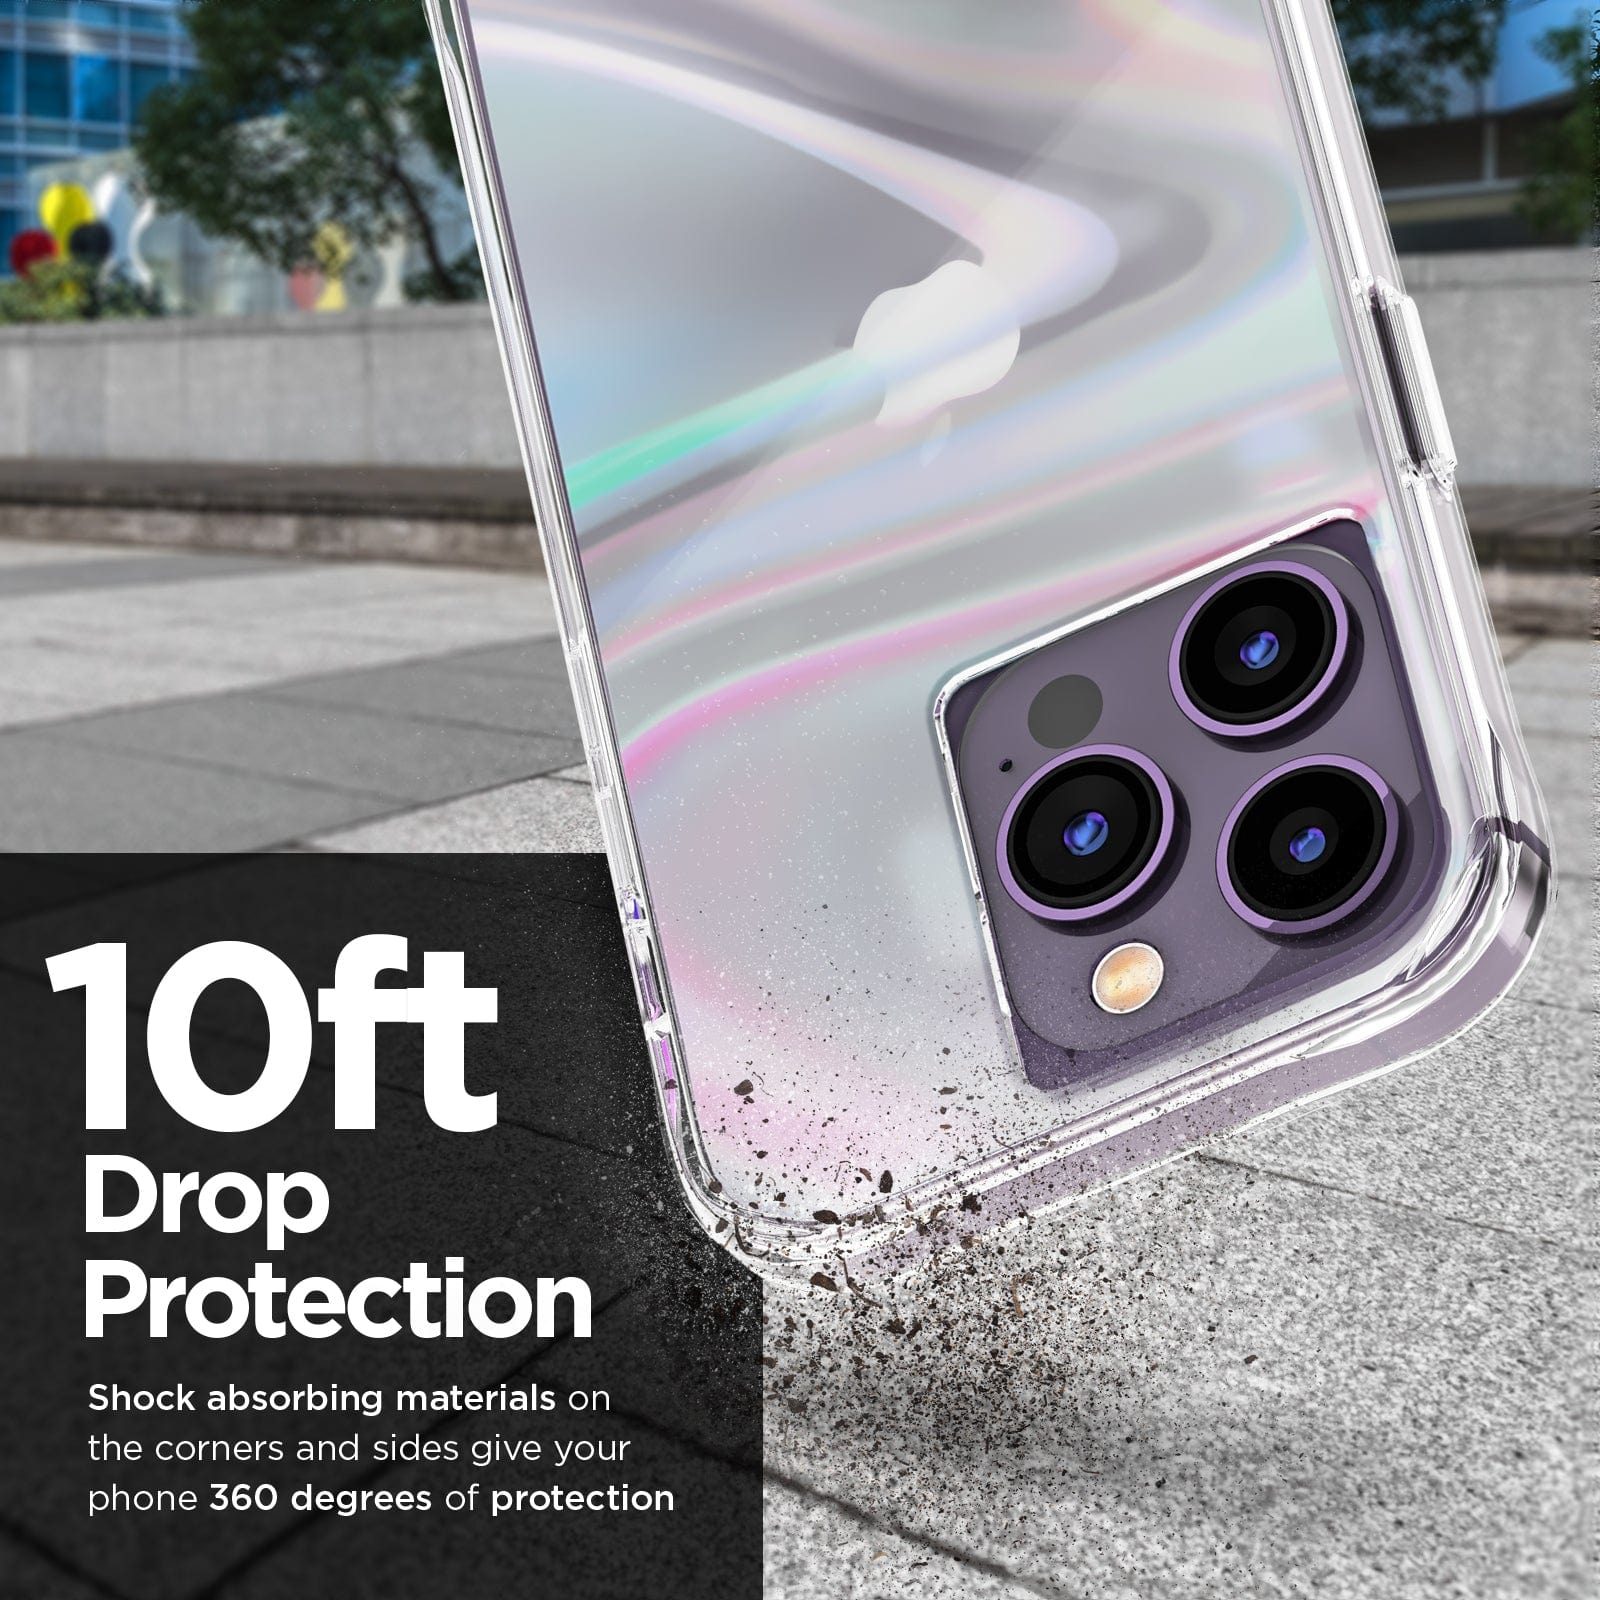 10FT DROP PROTECTION. SHOCK ABSORBING MATERIALS ON THE CORNERS AND SIDES GIVE YOUR PHONE 360 DEGREES OF PROTECTION